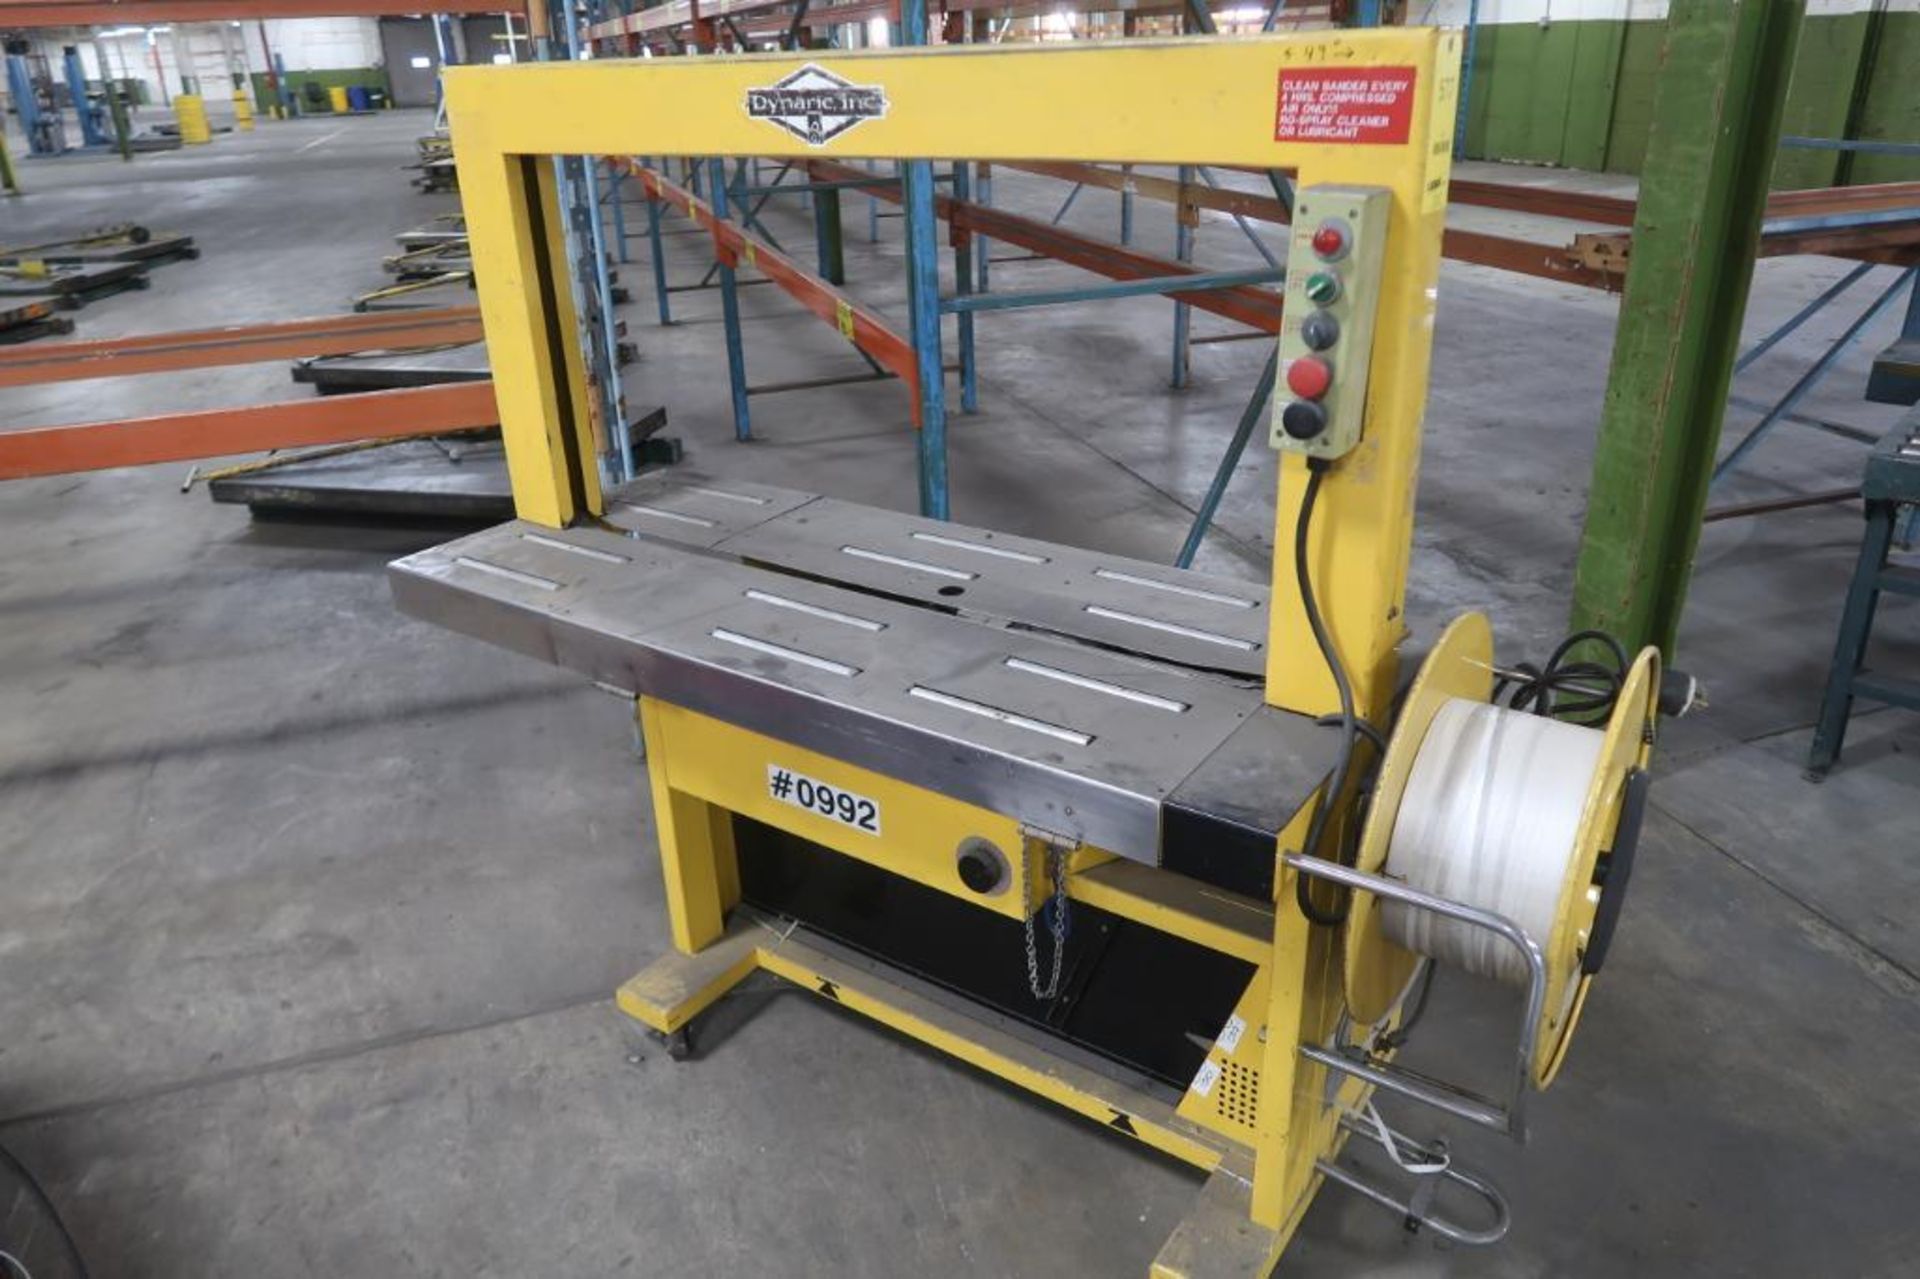 Dynaric Automatic Strapping Machine Model AM-600, S/N 16279007, 48 in. Opening, LOCATION: MAIN PRESS